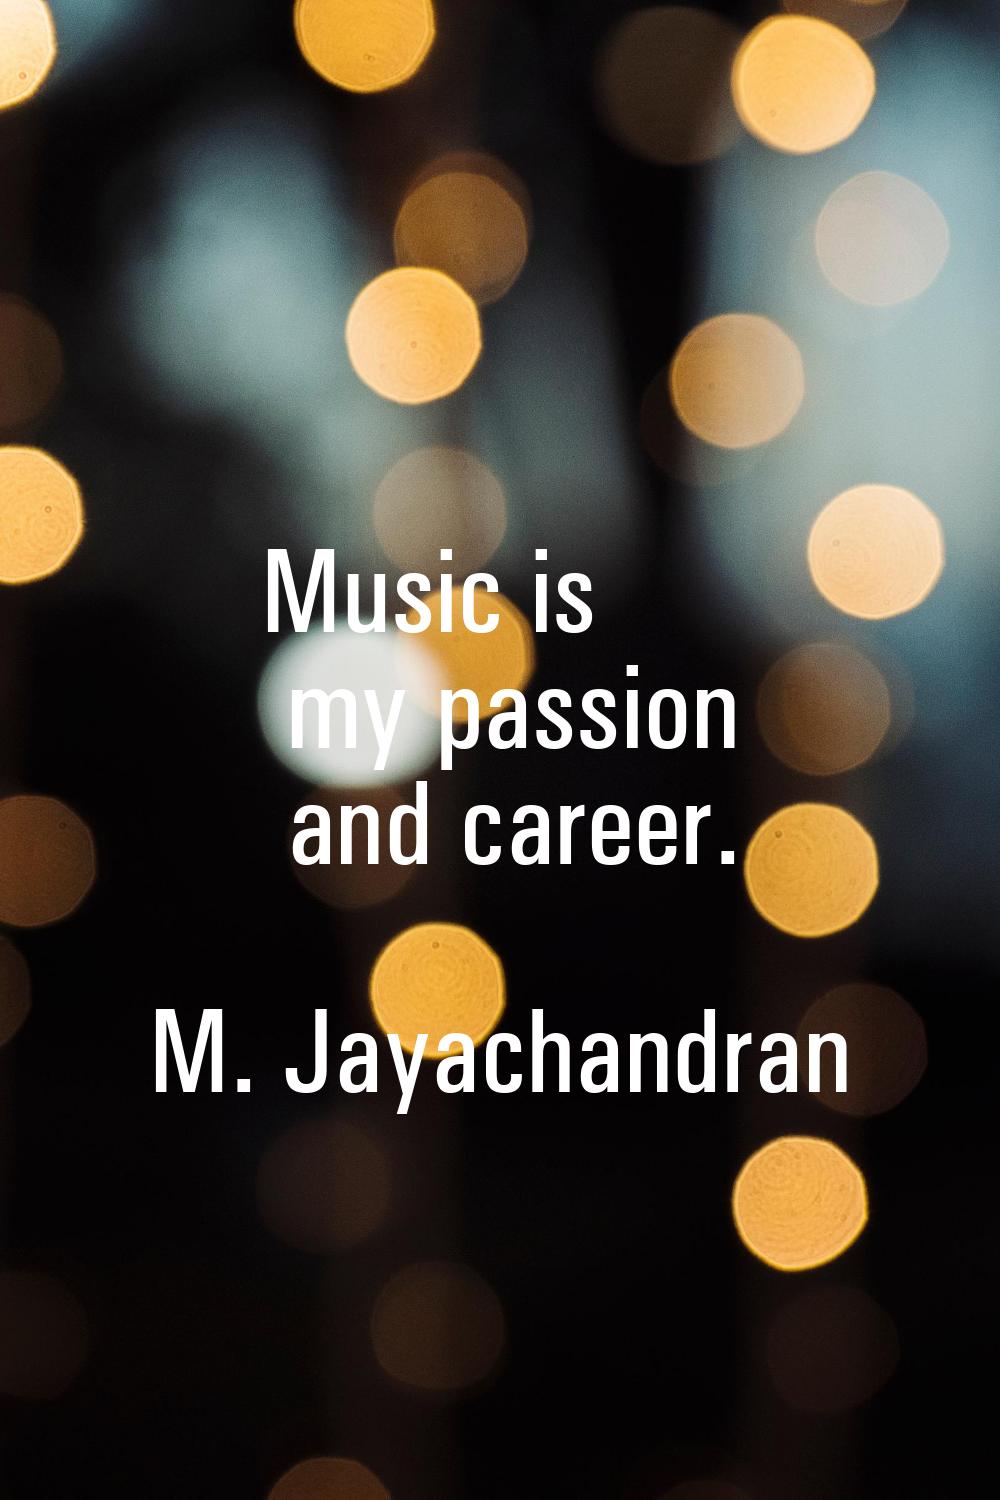 Music is my passion and career.